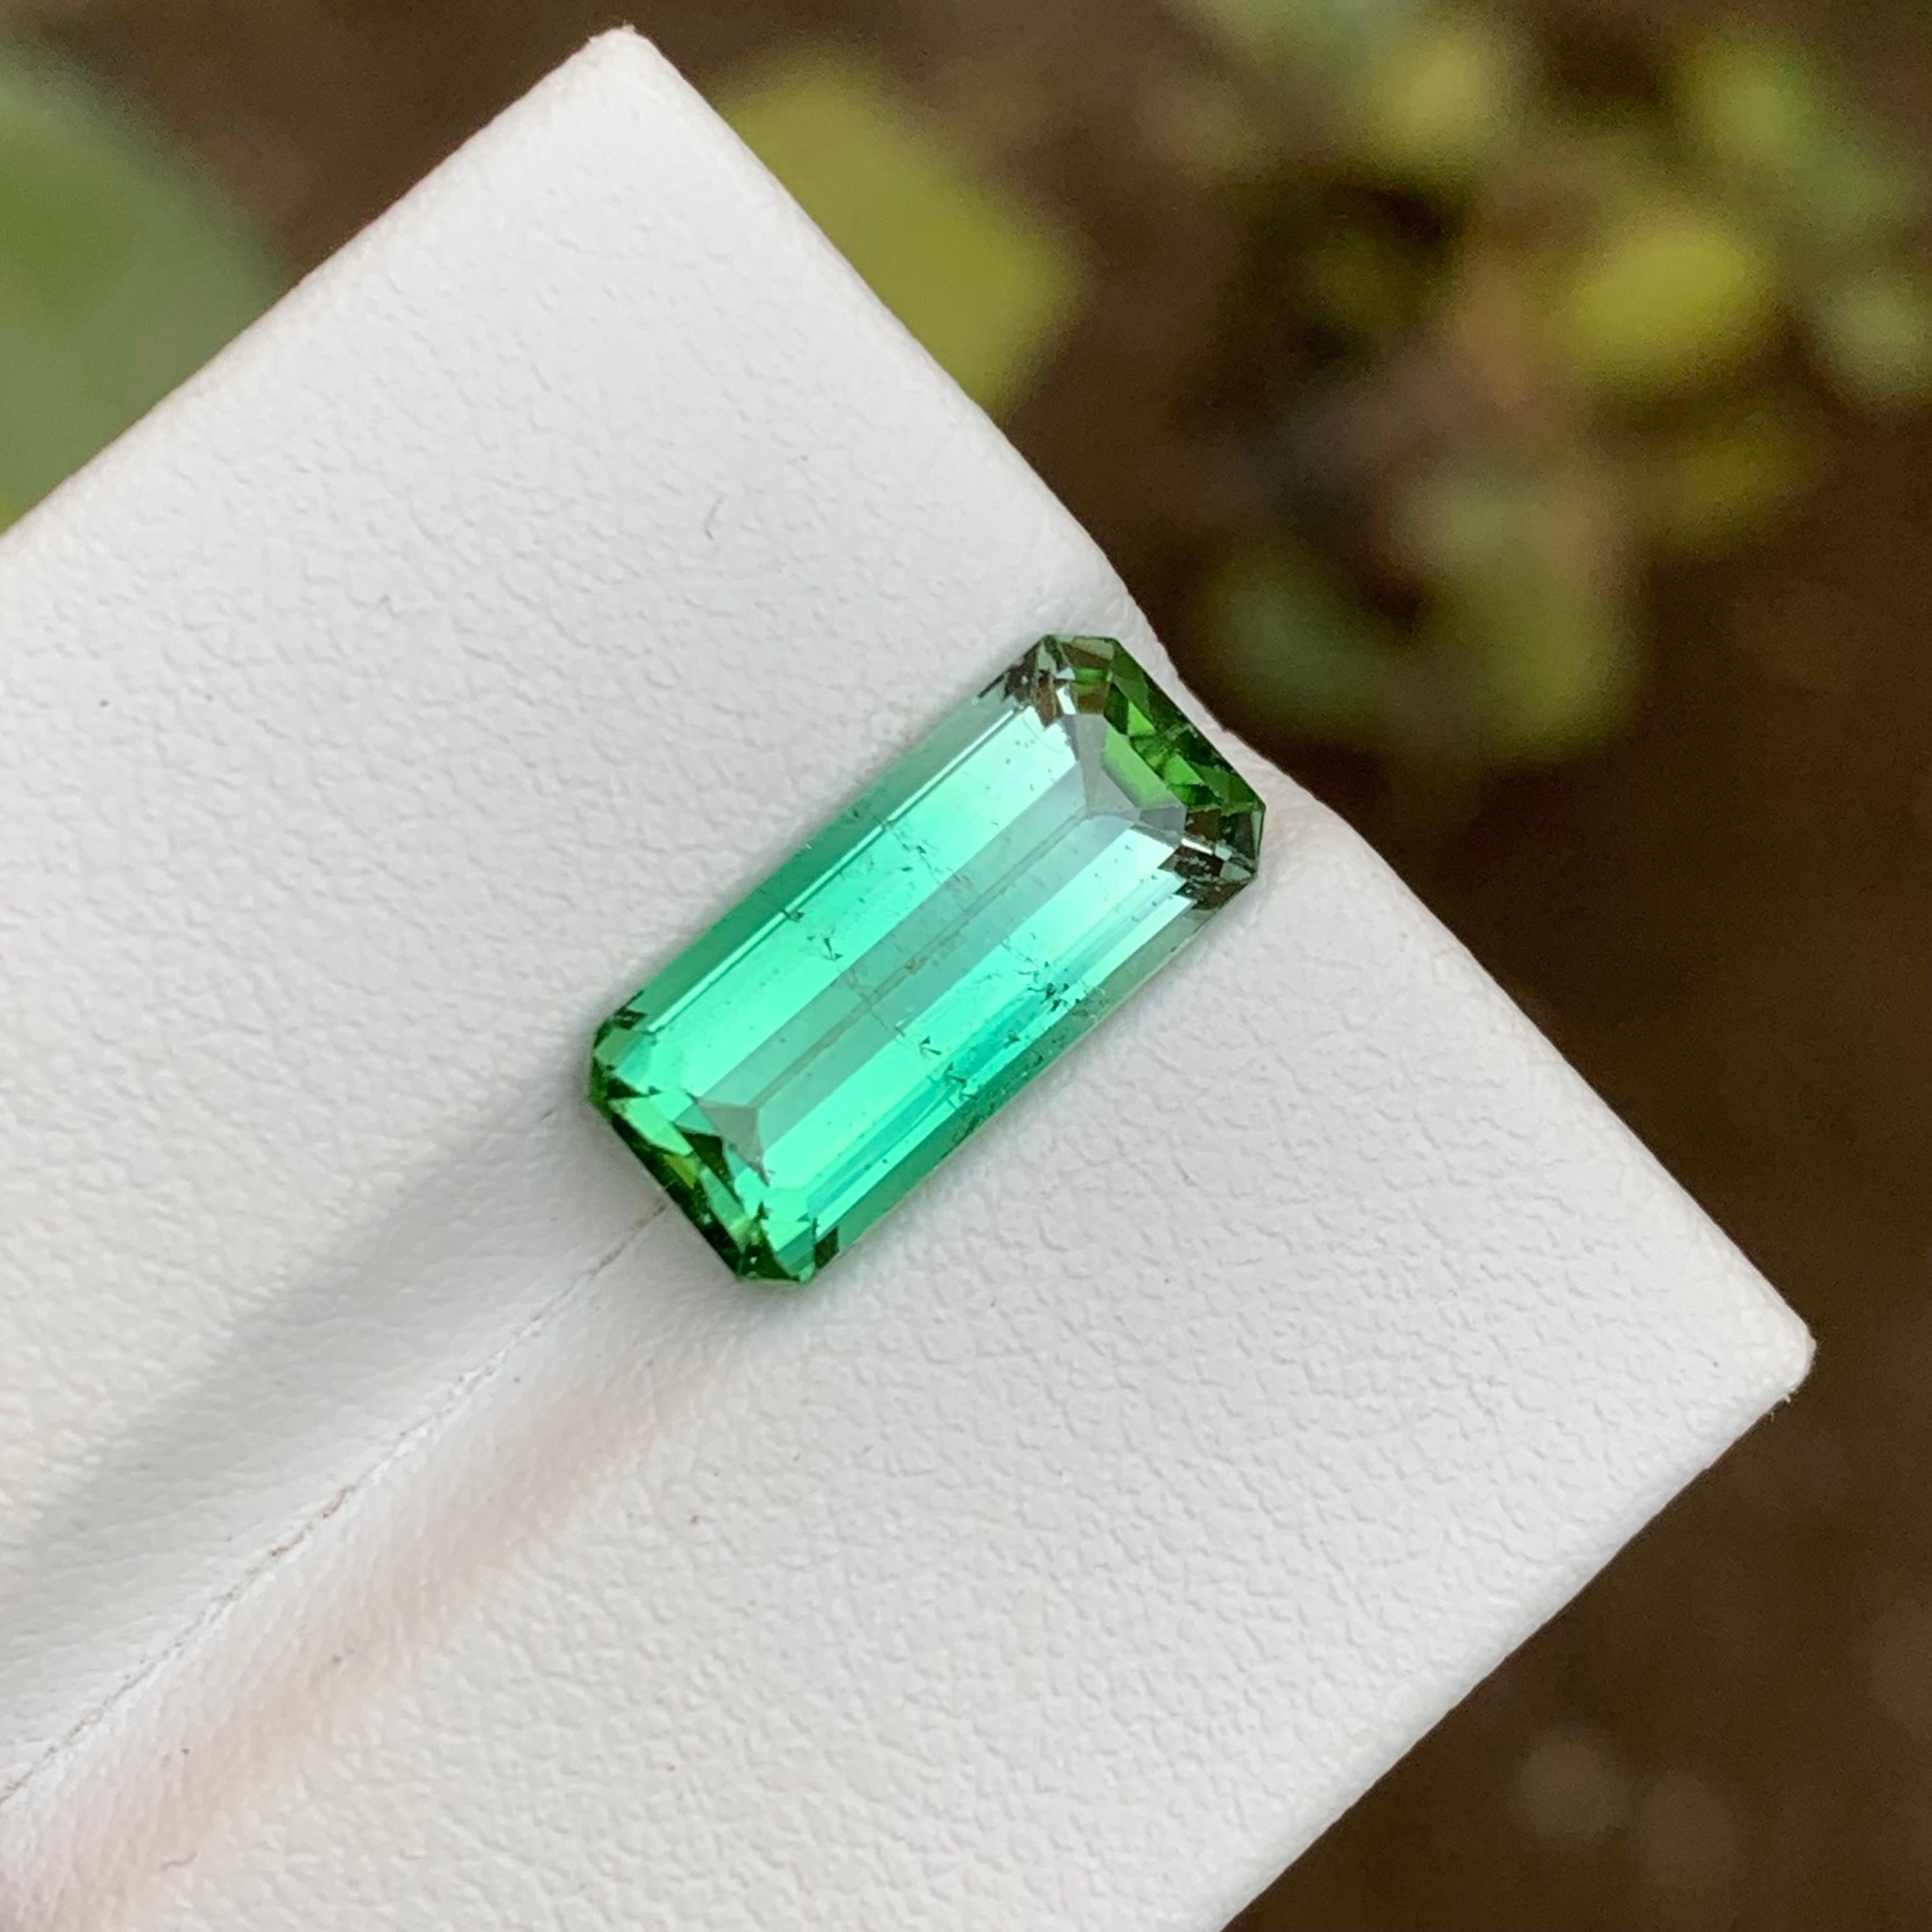 GEMSTONE TYPE: Tourmaline
PIECE(S): 1
WEIGHT: 4.40 Carats
SHAPE: Step Emerald
SIZE (MM):  14.05 x 6.61 x 5.27
COLOR: Neon Lagoon Green Bicolor
CLARITY: Slightly Included 
TREATMENT: None
ORIGIN: Afghanistan
CERTIFICATE: On demand

This dazzling 4.40